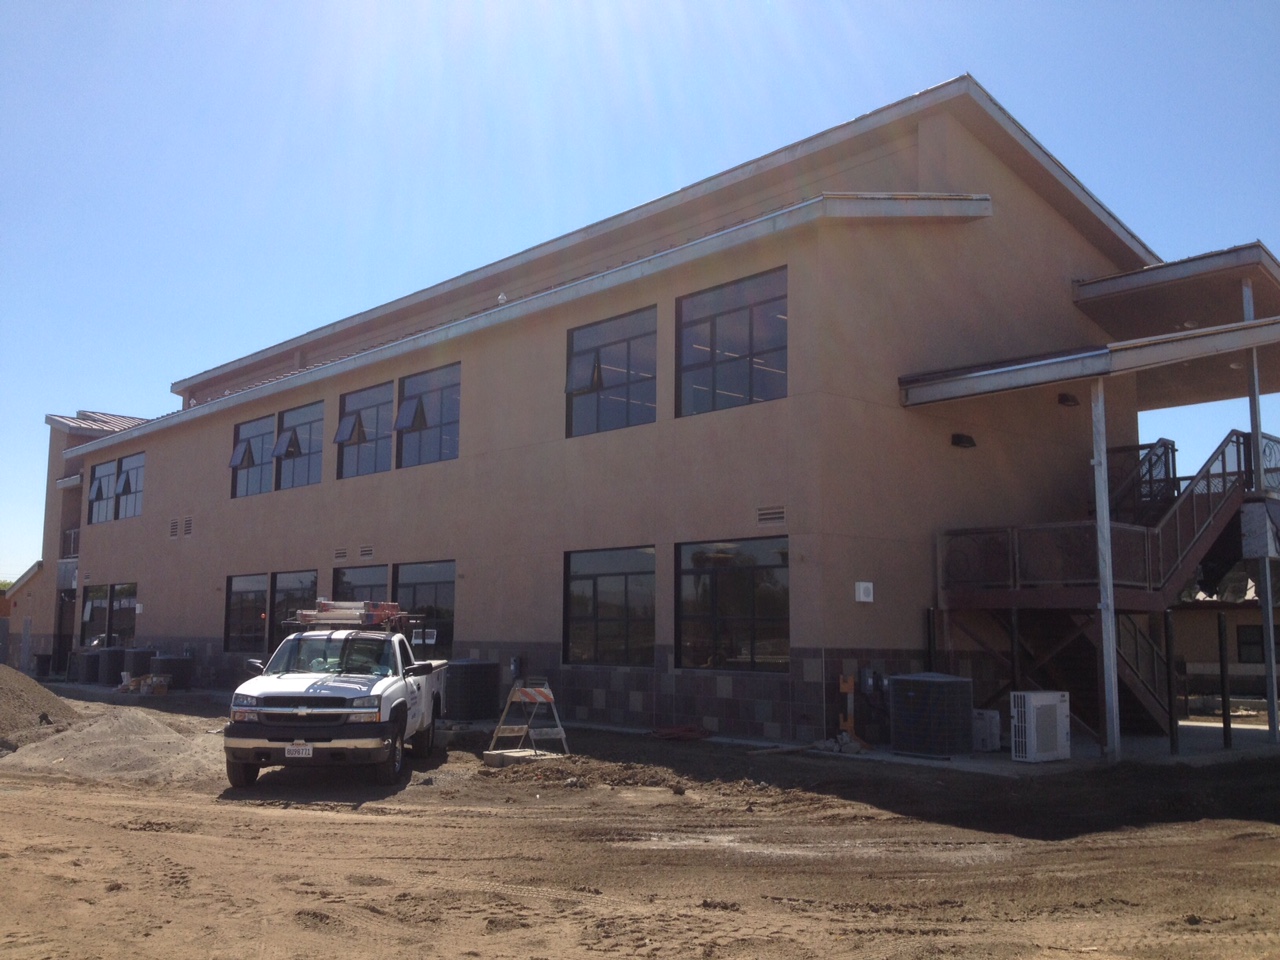 Easterbrook Discovery Modular School Construction Nearing Completion